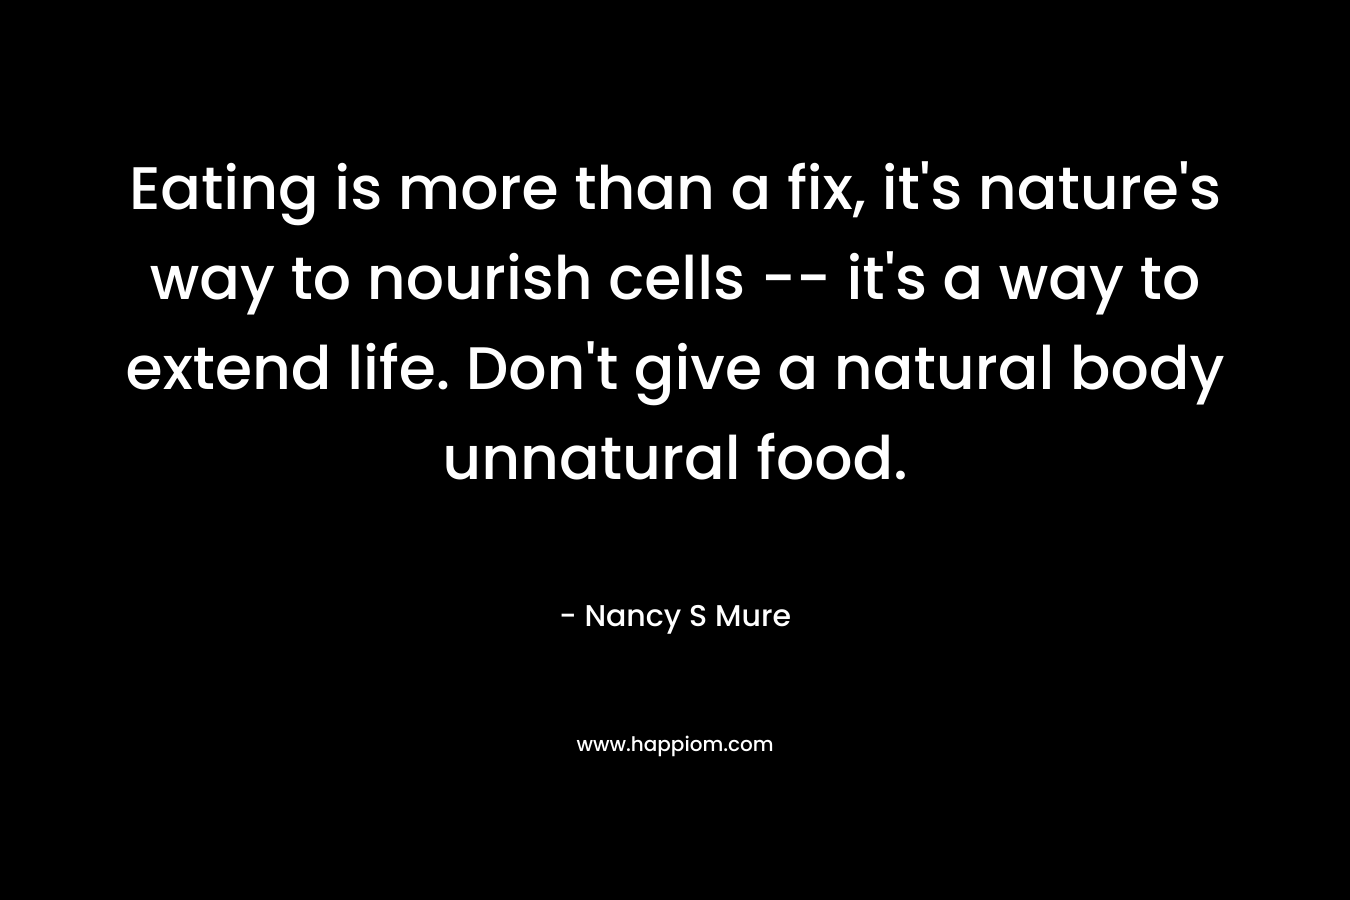 Eating is more than a fix, it’s nature’s way to nourish cells — it’s a way to extend life. Don’t give a natural body unnatural food. – Nancy S Mure